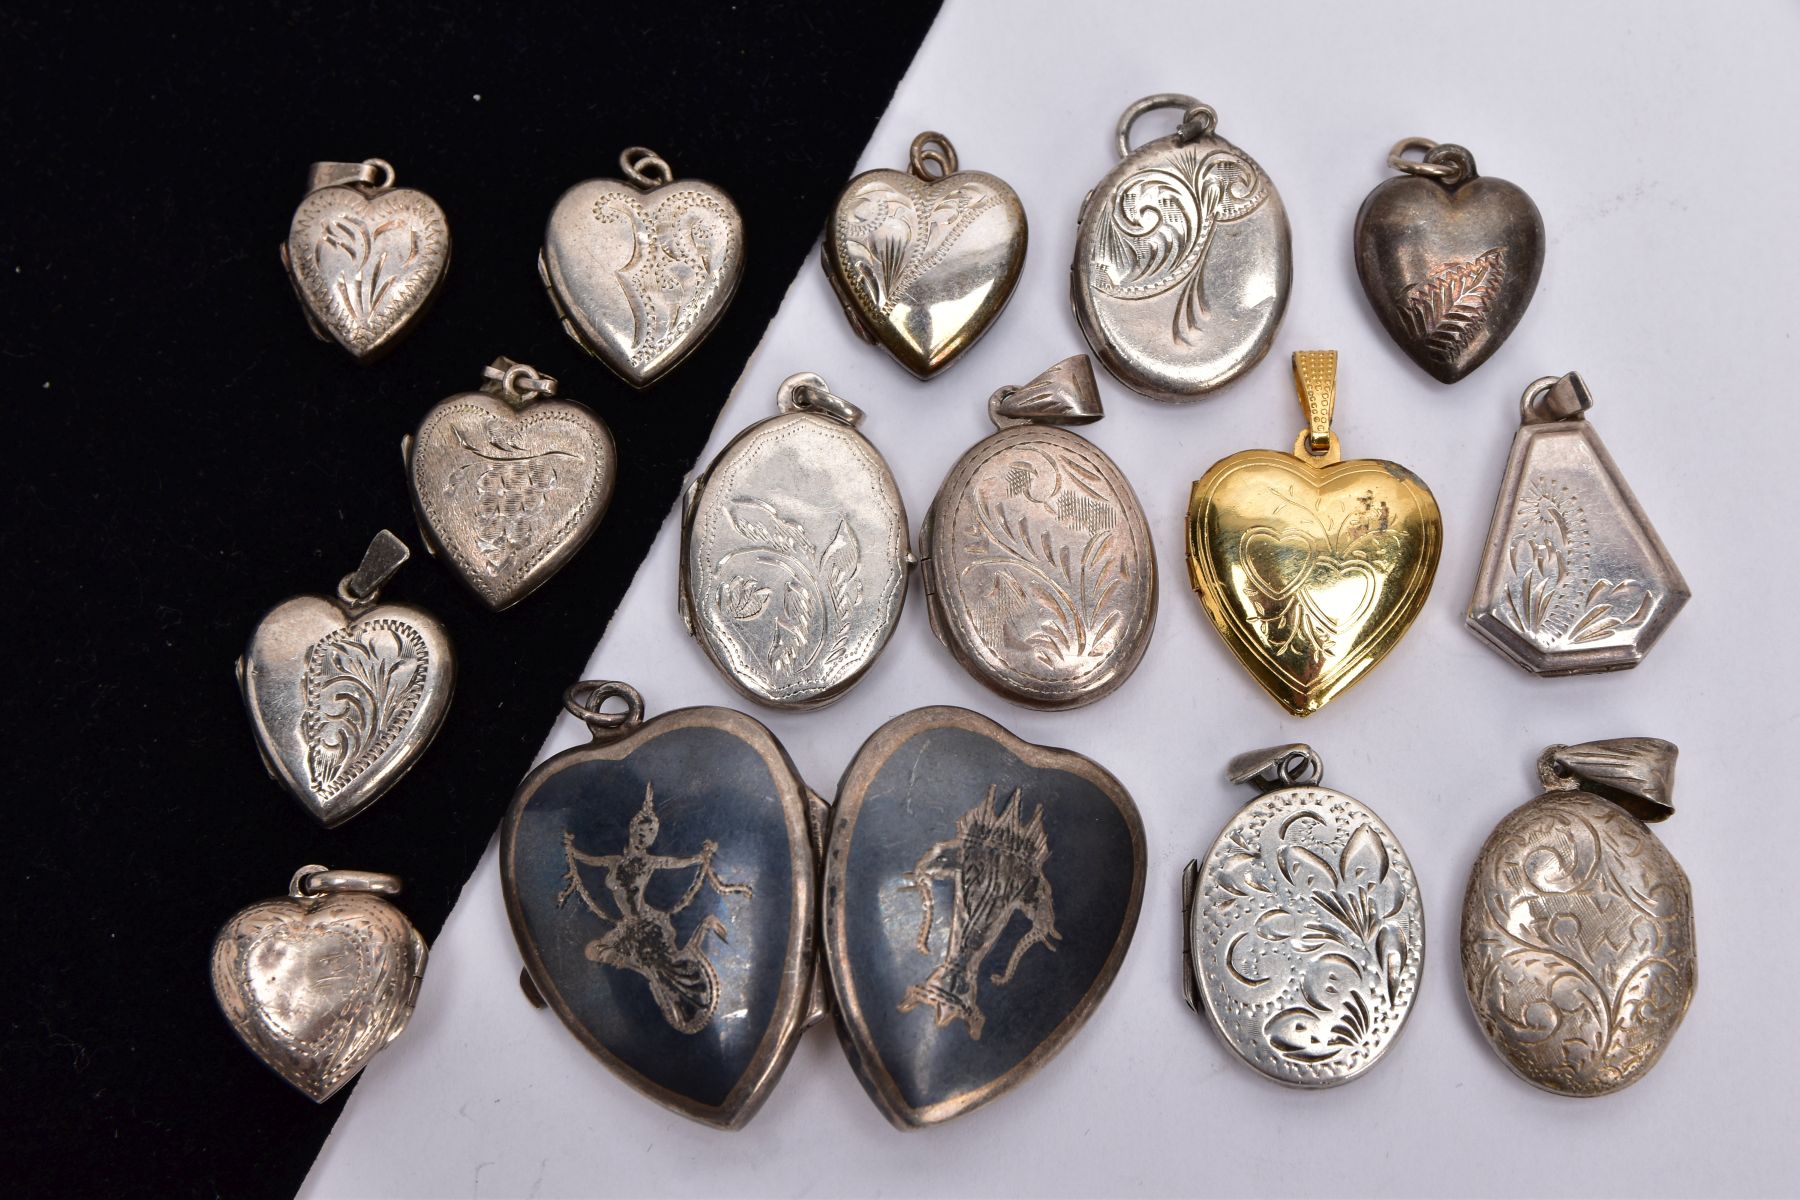 A BAG OF ASSORTED LOCKETS, with various engraved designs and shapes such as five ovals, seven